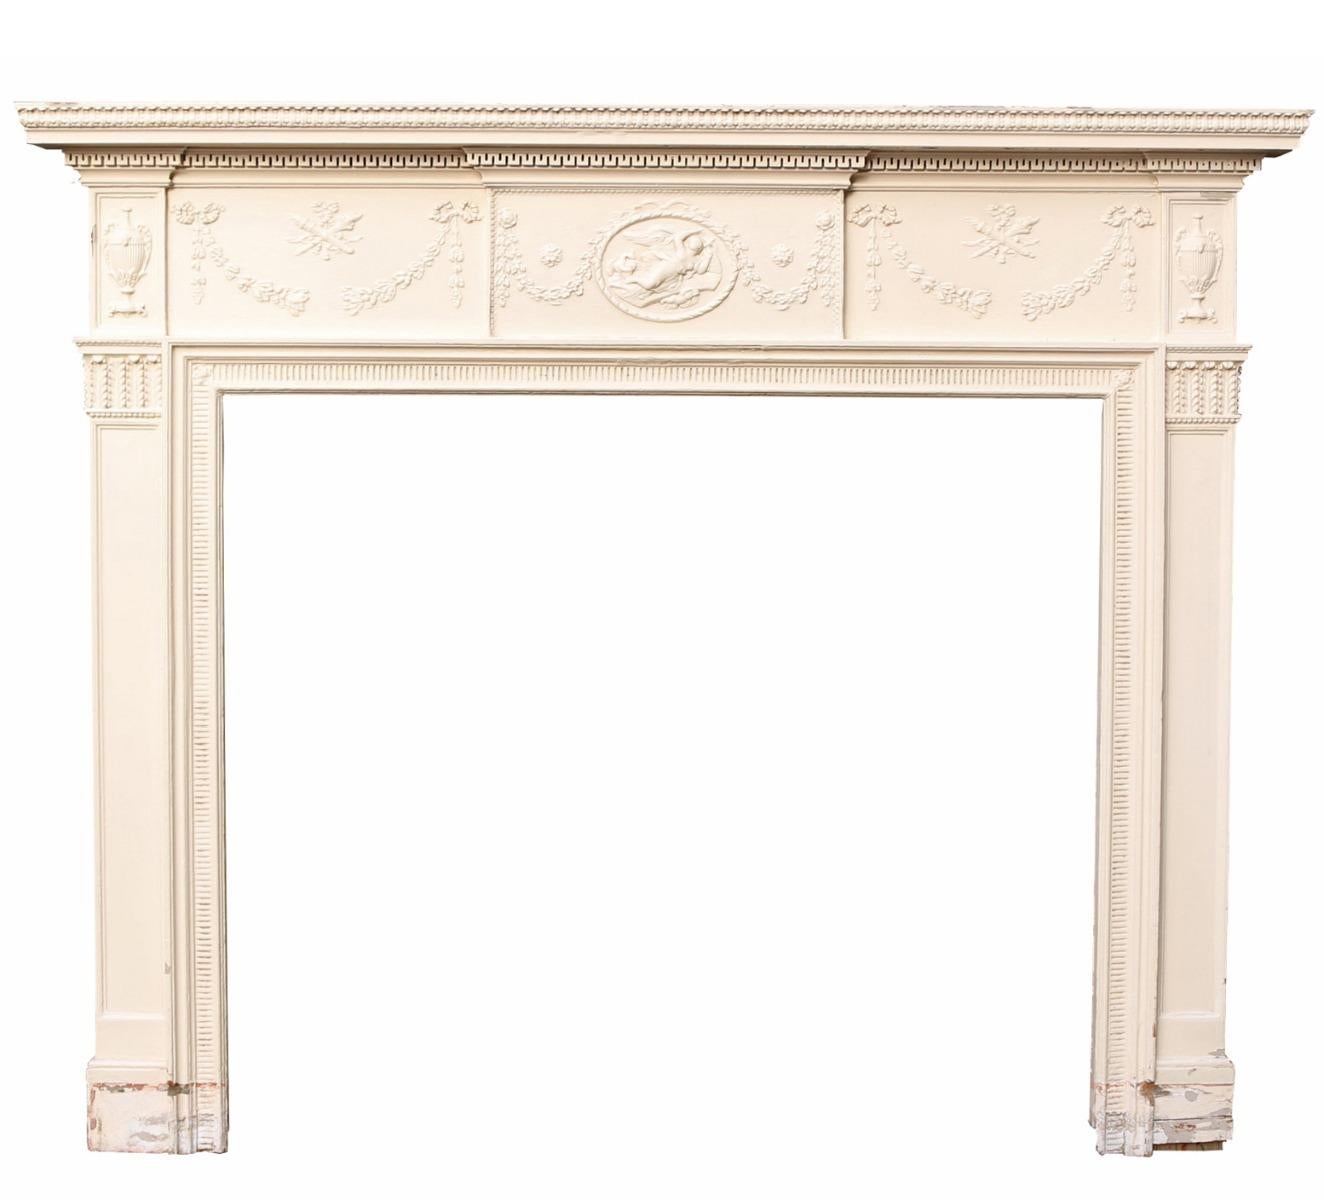 A late Georgian or Regency period painted pine and gesso / composition fire surround. This was salvaged from a house in Dorchester.

Additional Dimensions:

Opening height 115.5 cm

Opening width 132.5 cm

Width between outside of legs 175.5